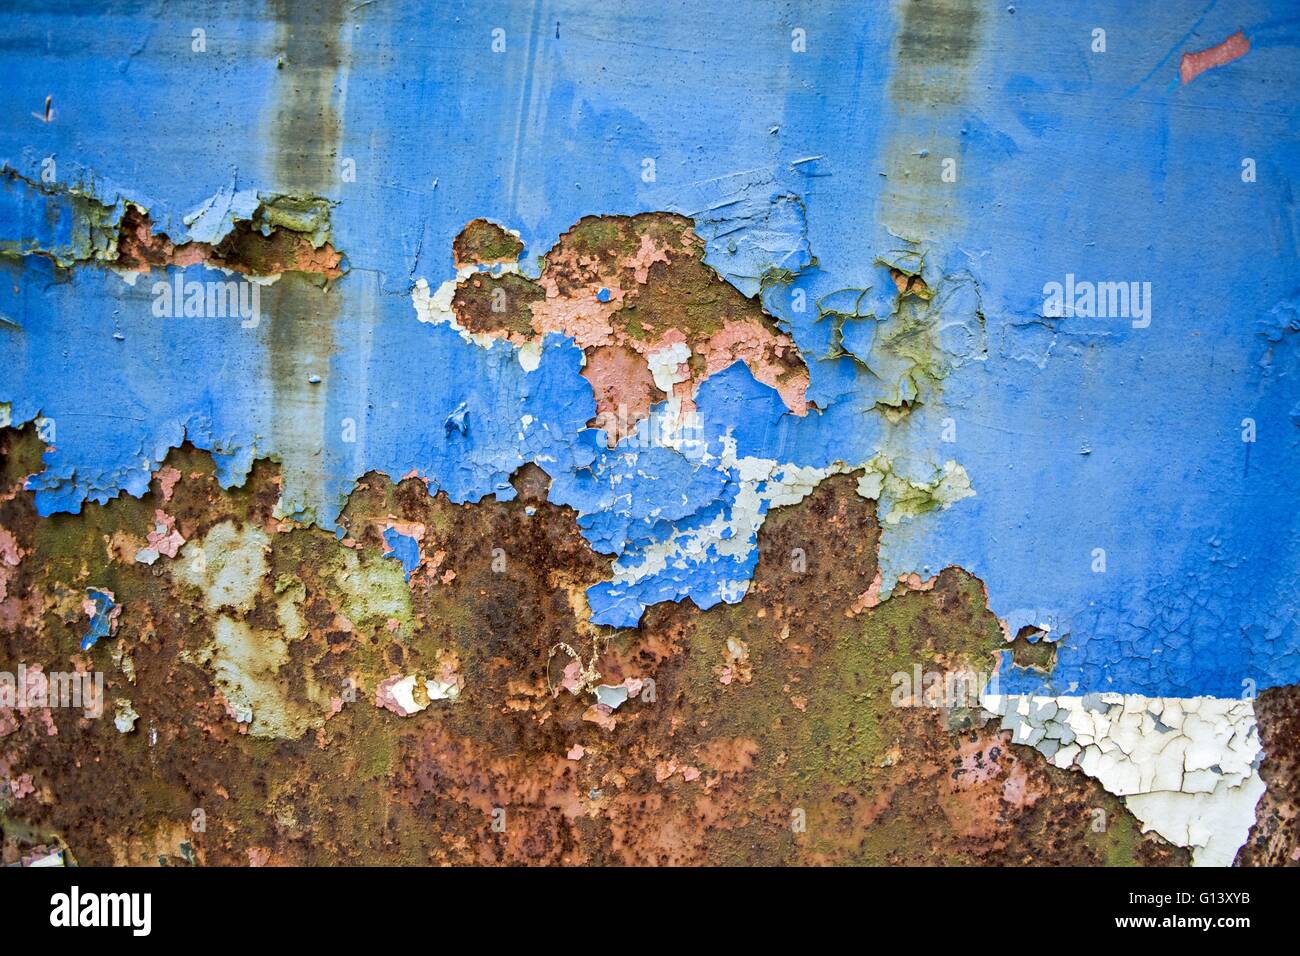 Old and damaged, cracked paint on tin surfaces. Stock Photo